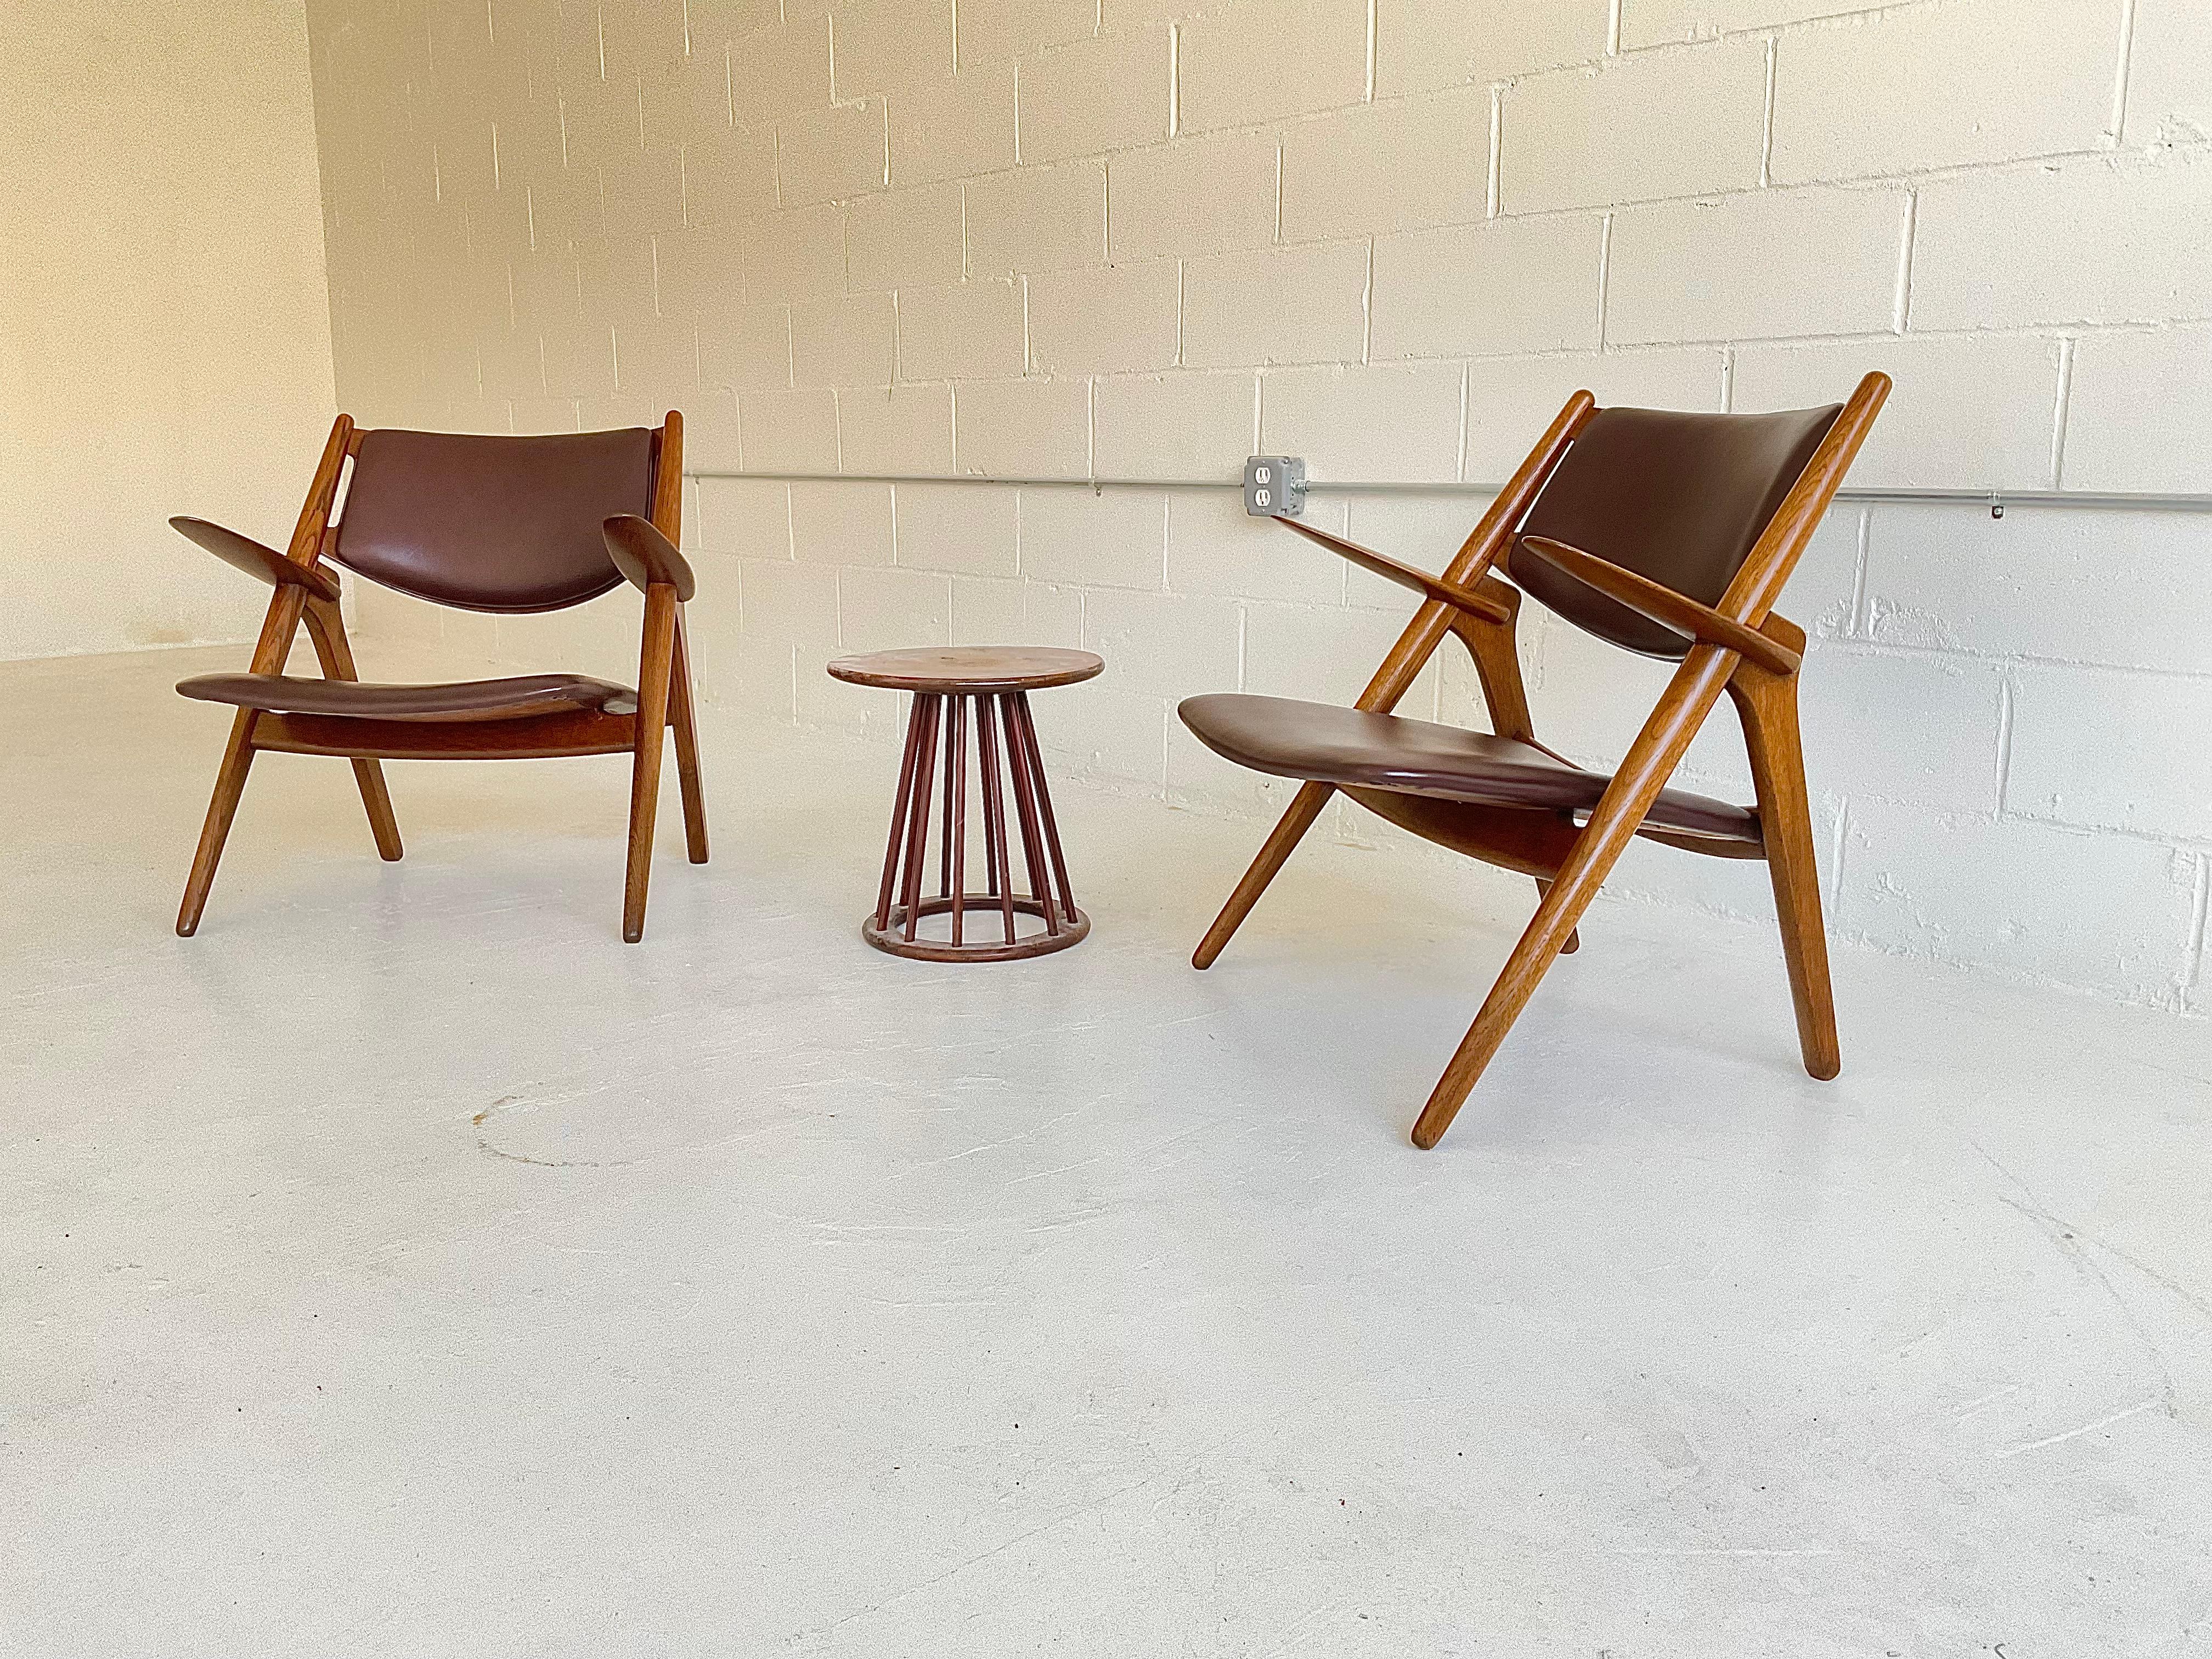 Hans Wegner Vintage Sawbuck Chairs for Carl Hansen CH28 in Oak & Leather, 1951 For Sale 2